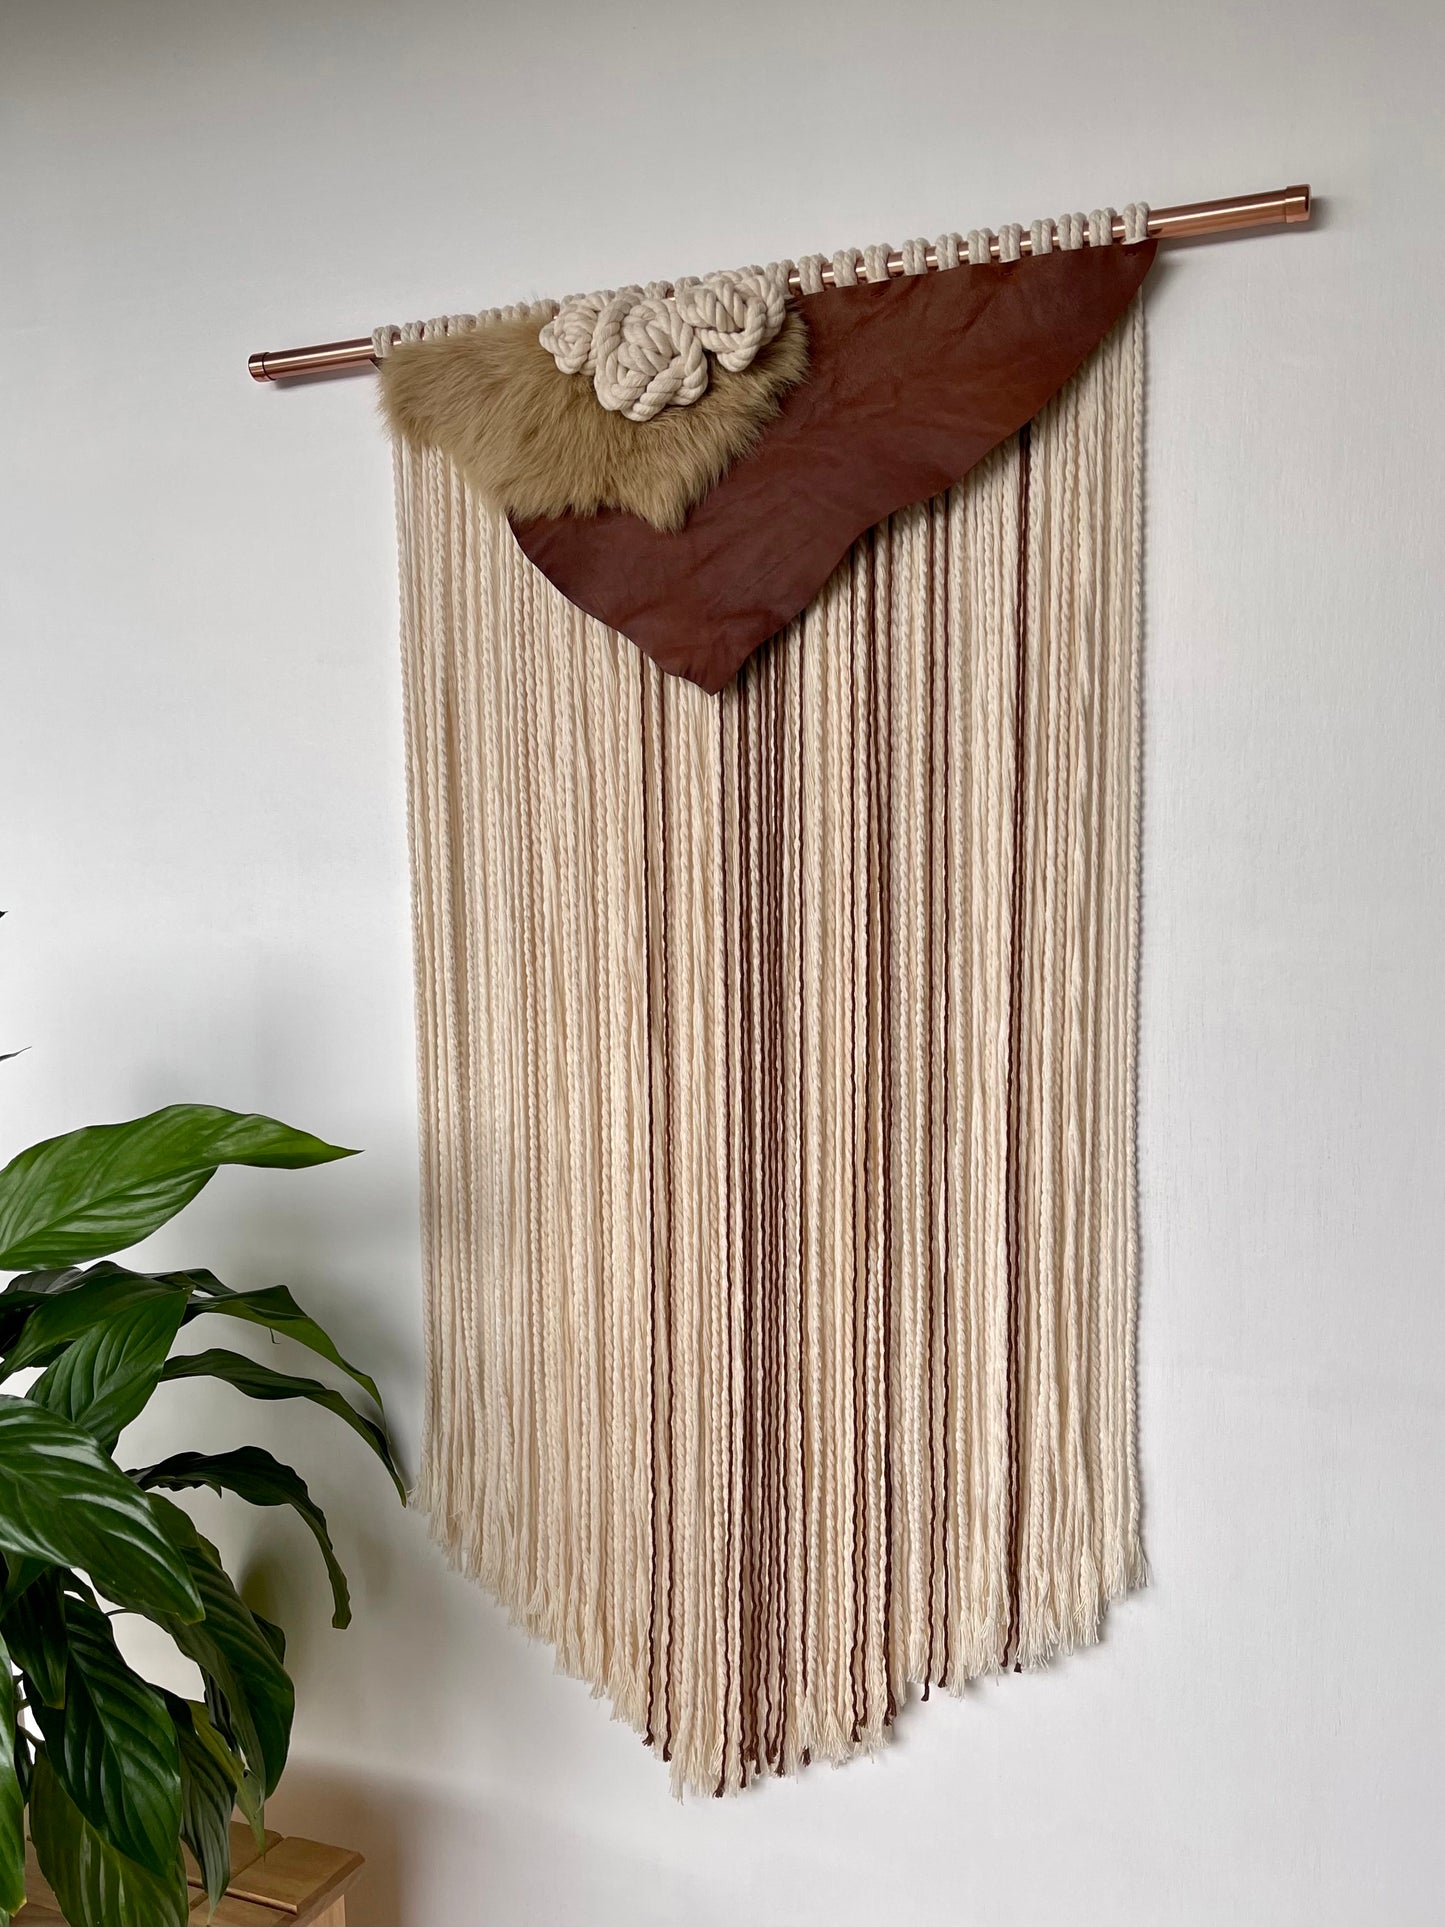 Handcrafted large cream brown leather cotton cord sheepskin wall hanging